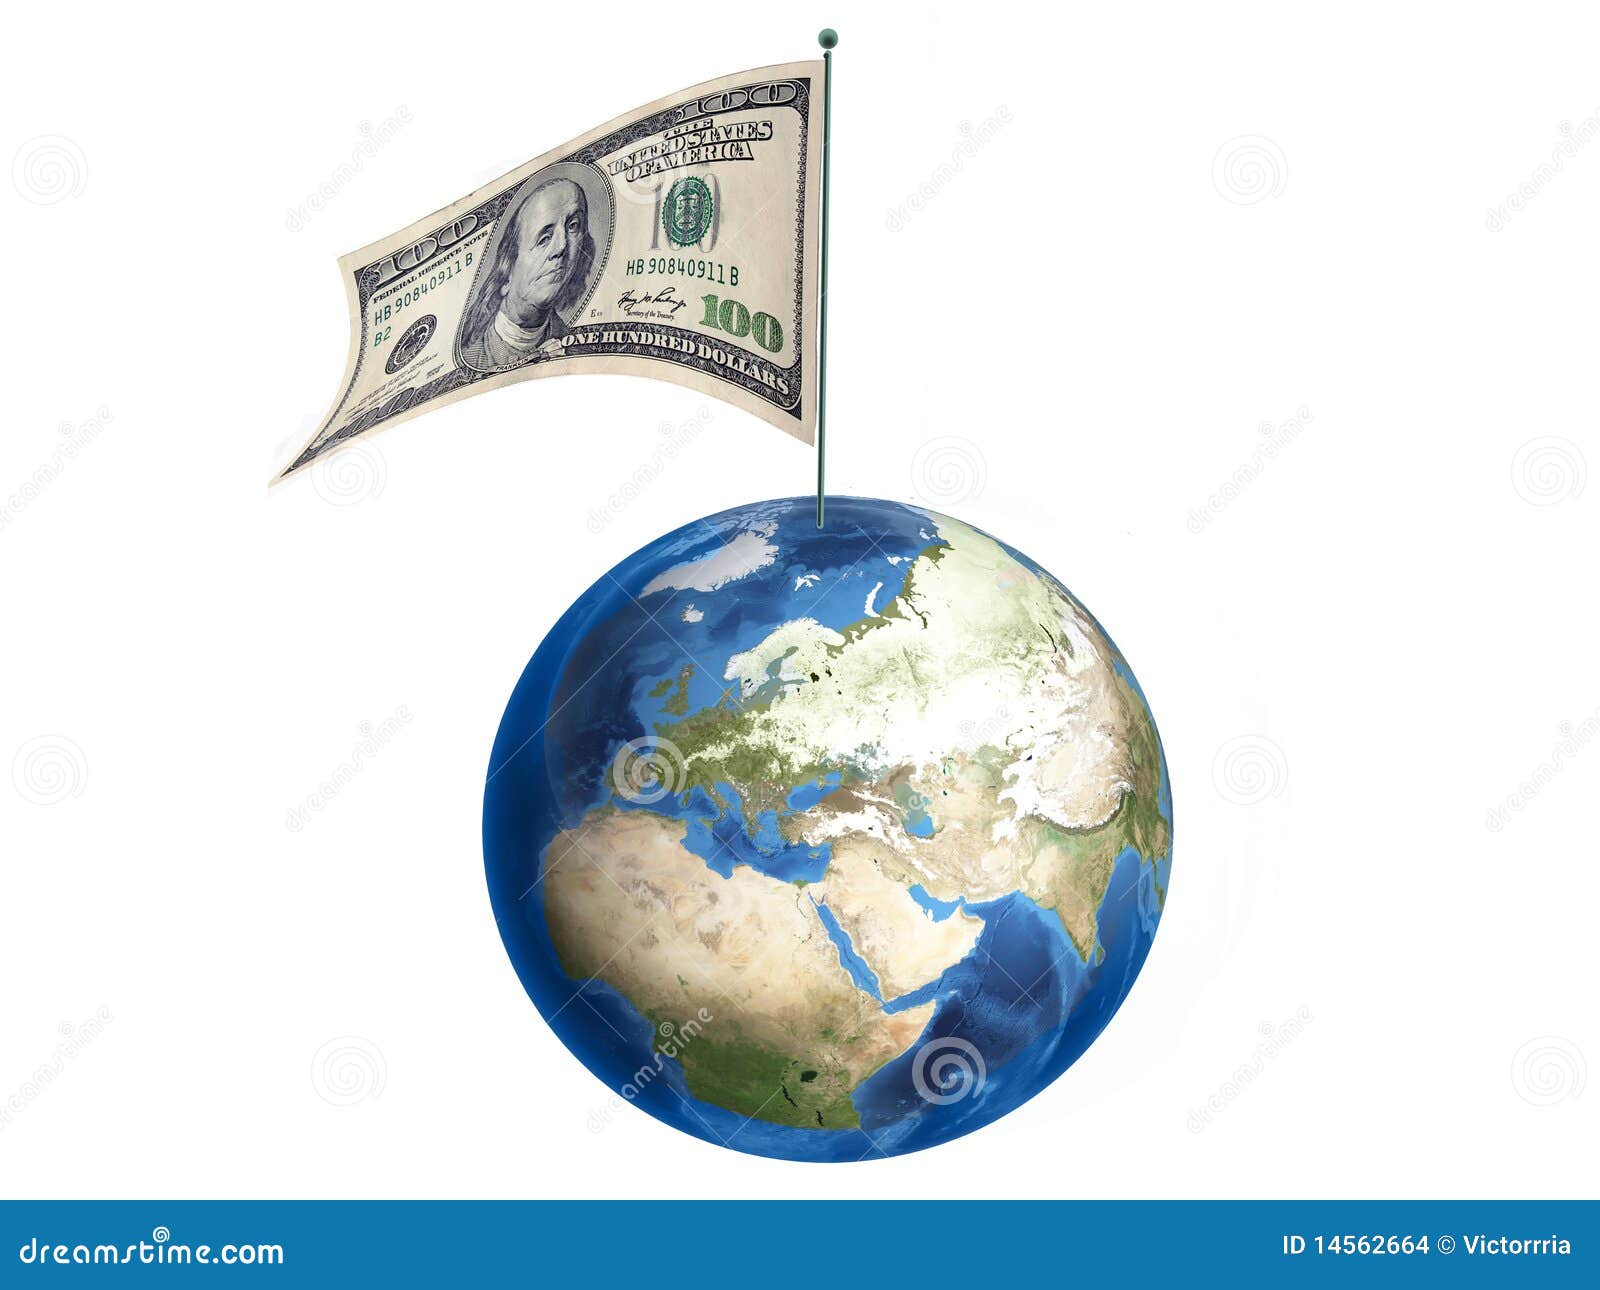 https://thumbs.dreamstime.com/z/dollar-which-today-unites-whole-world-14562664.jpg